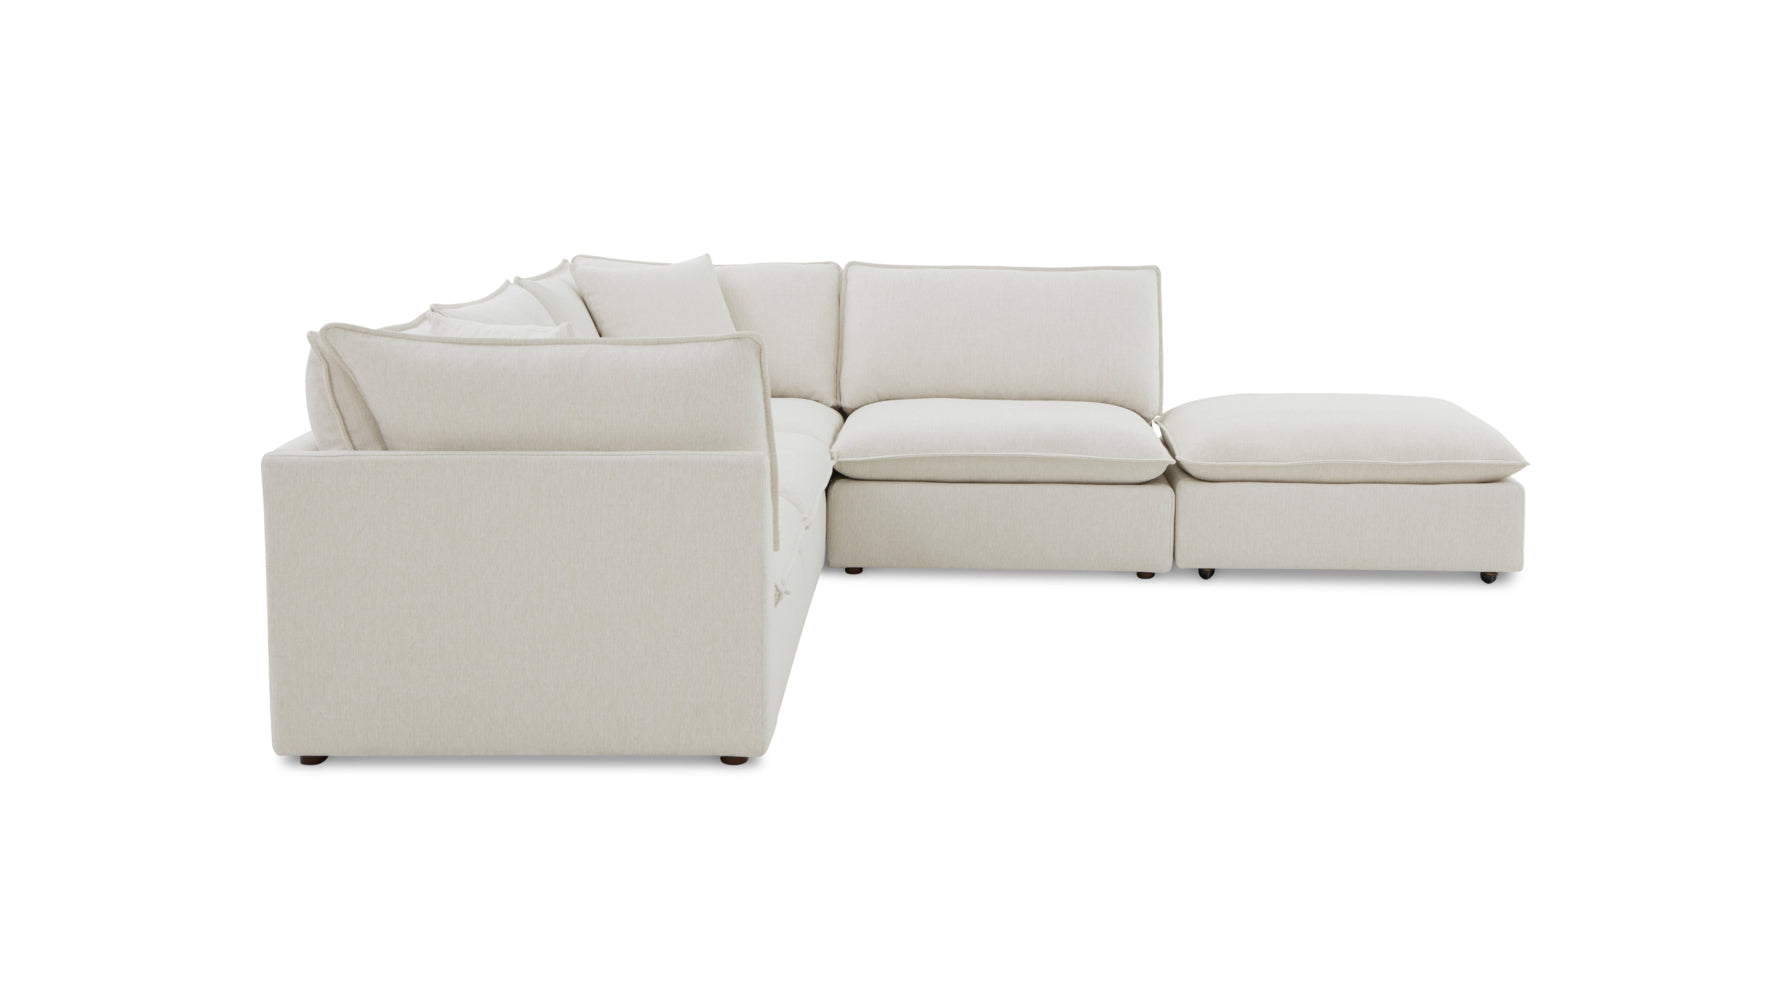 Chill Time 5-Piece Modular Sectional, Birch - Image 6